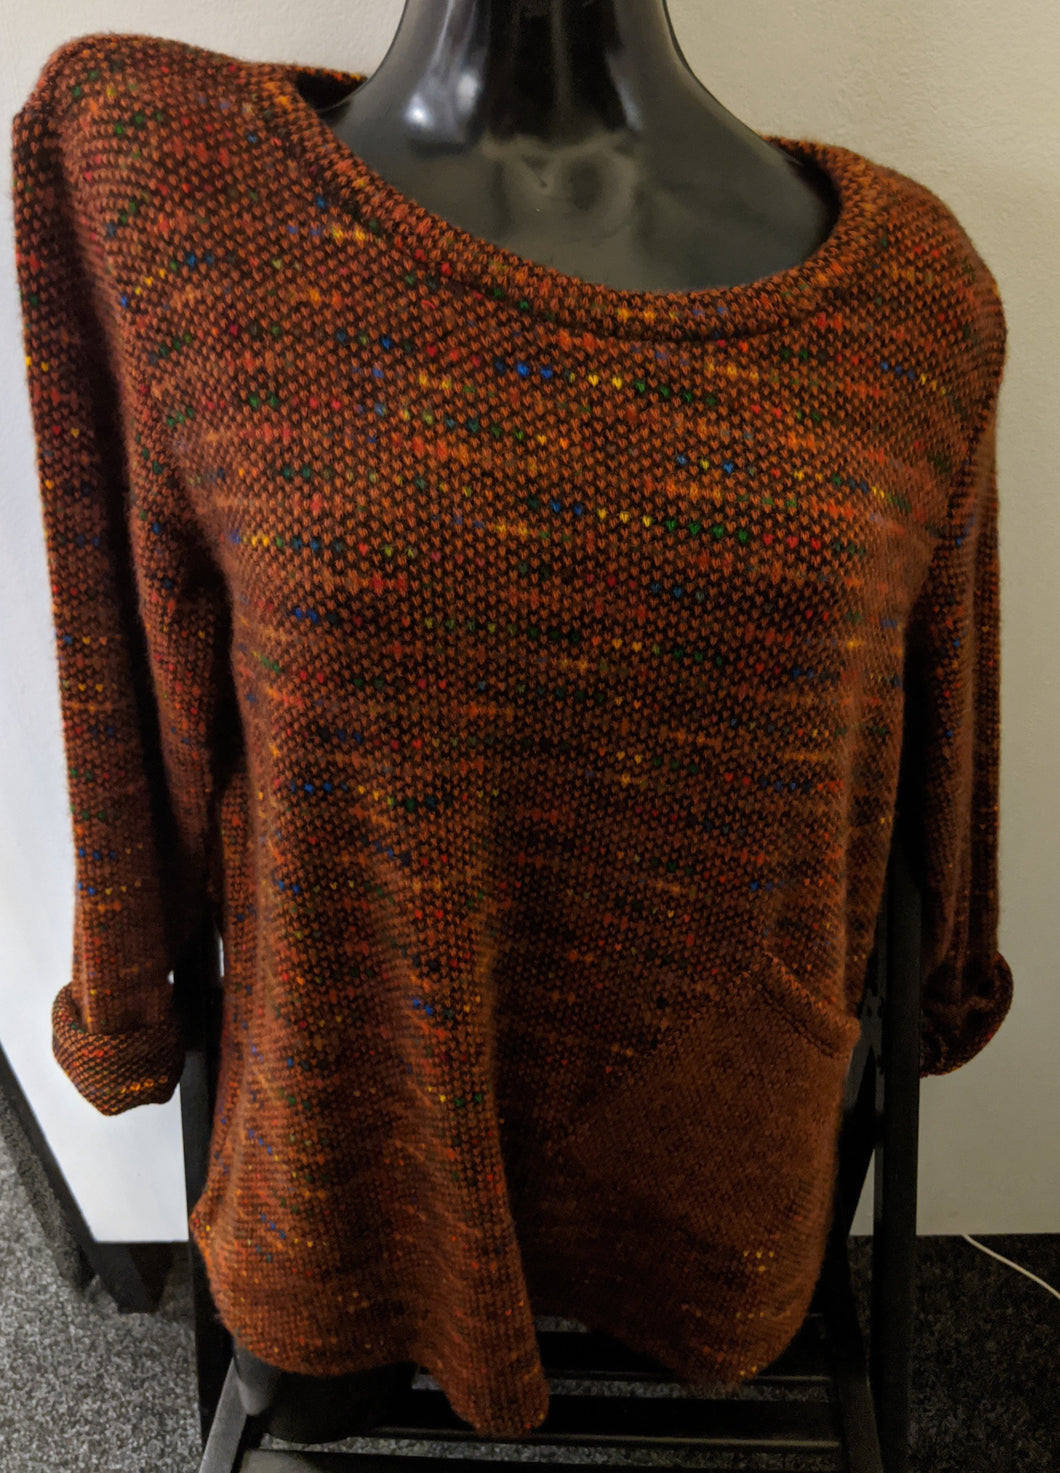 Made In Italy Rainbow Dots Top/Jumper